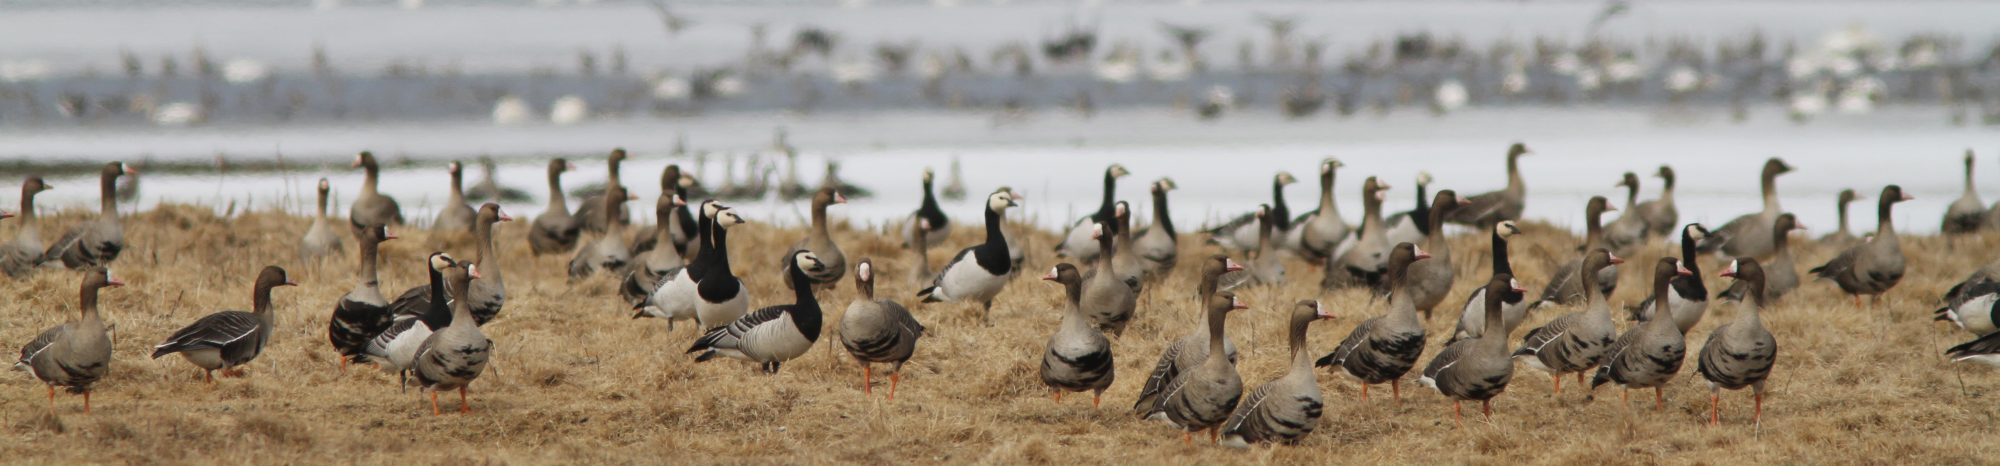 Geese conference